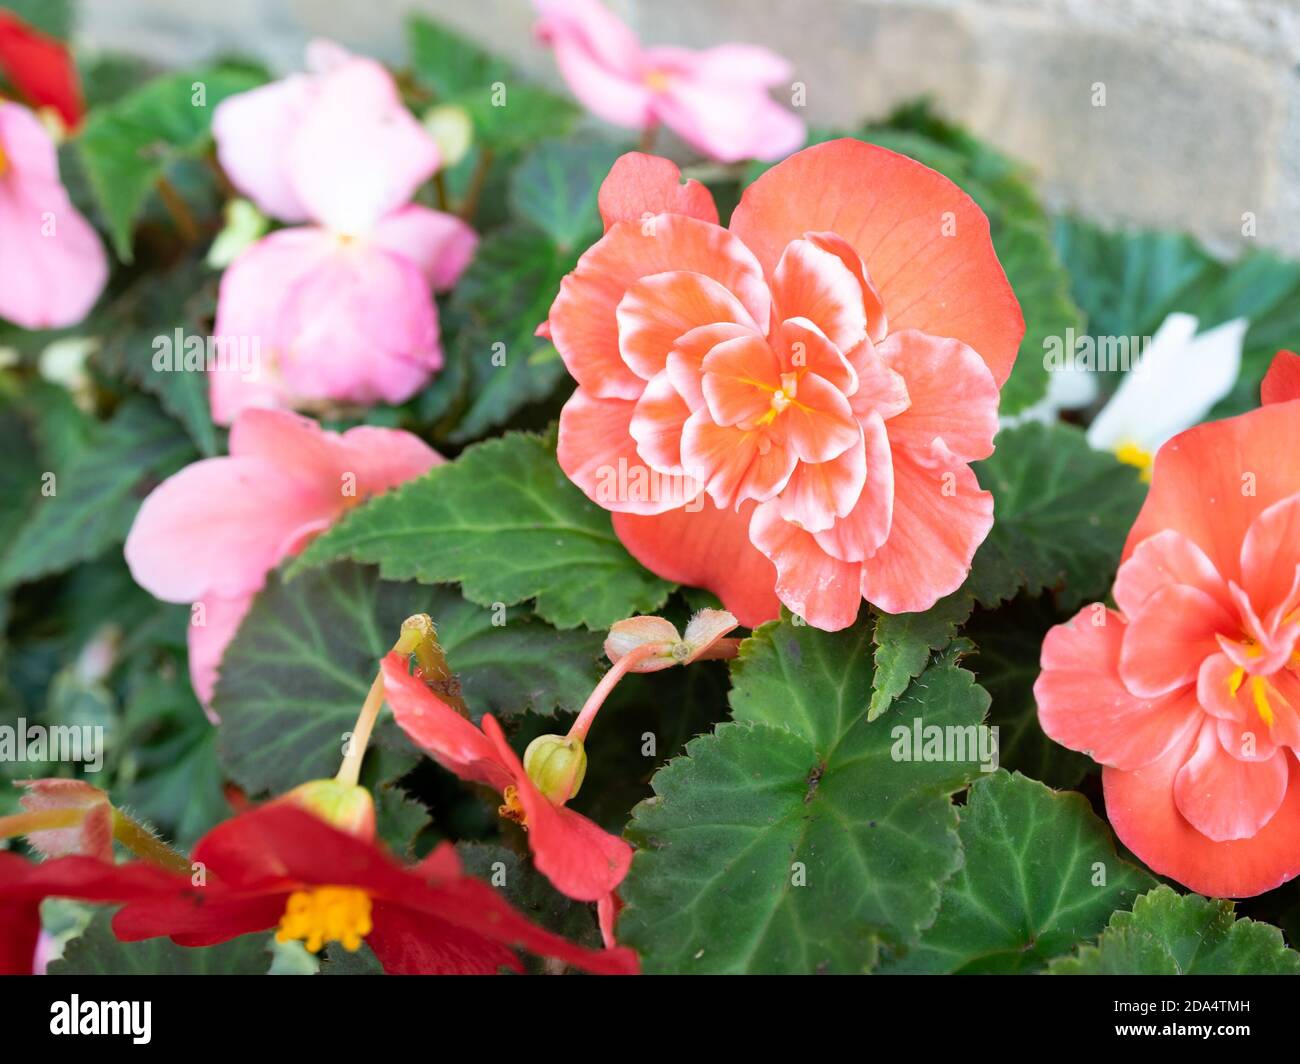 Double light red Begonia flower with white spots (Begonia tuberhybrida) Stock Photo